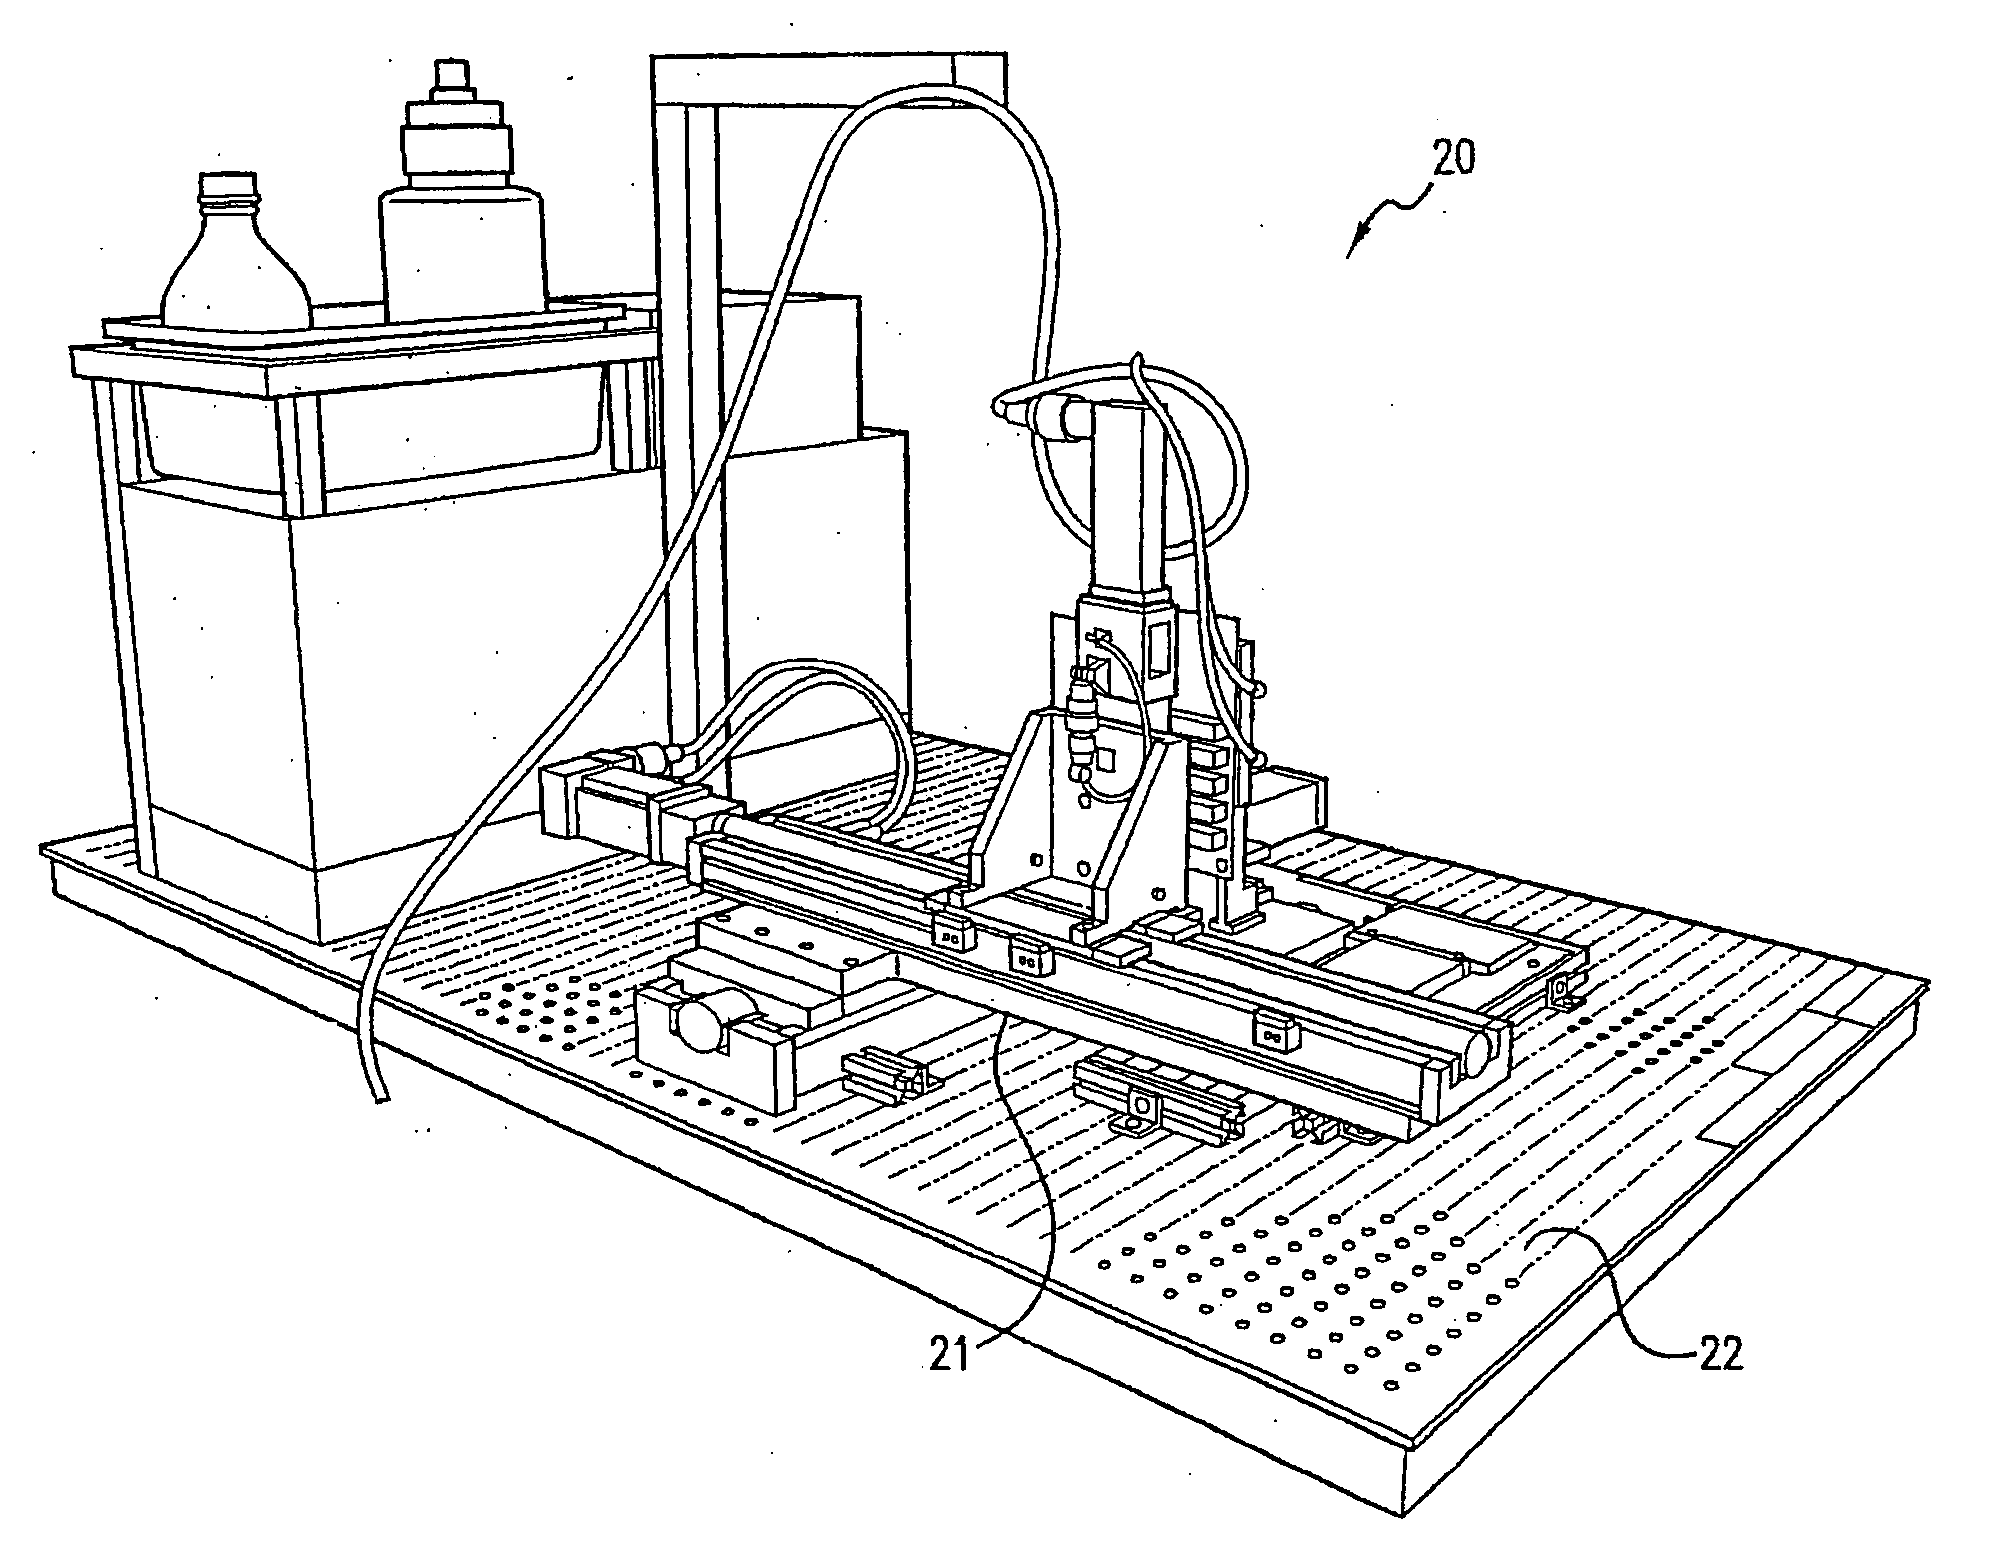 Method for preparation of microarrays for screening of crystal growth conditions